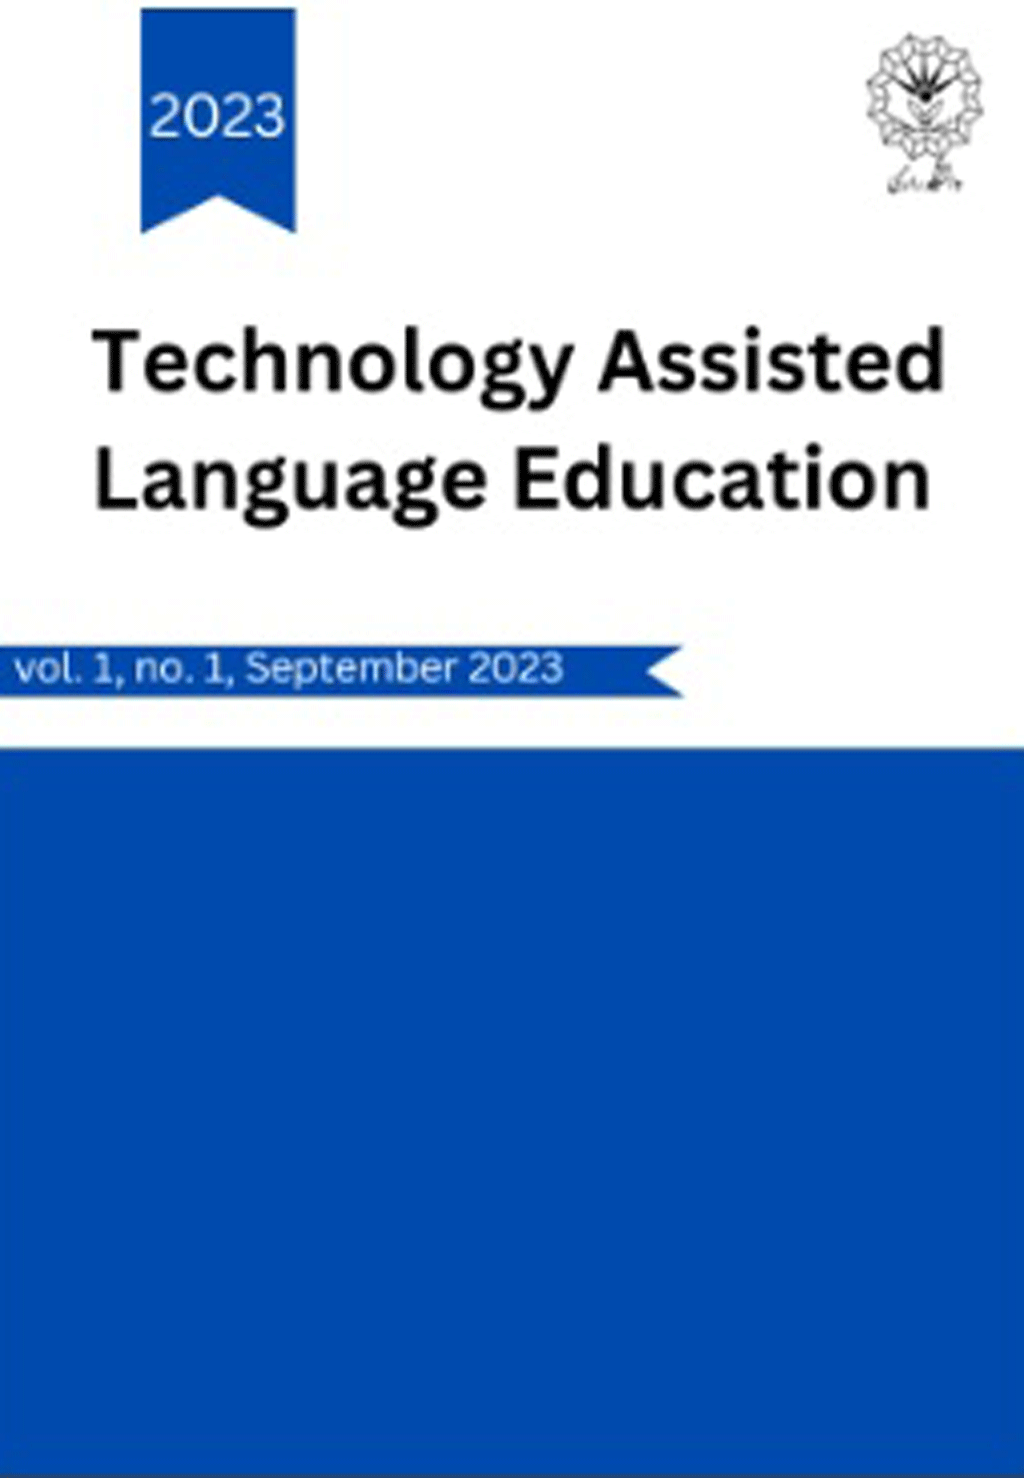 Technology Assisted Language Education - December 2023,  Volume 1 - Number 4